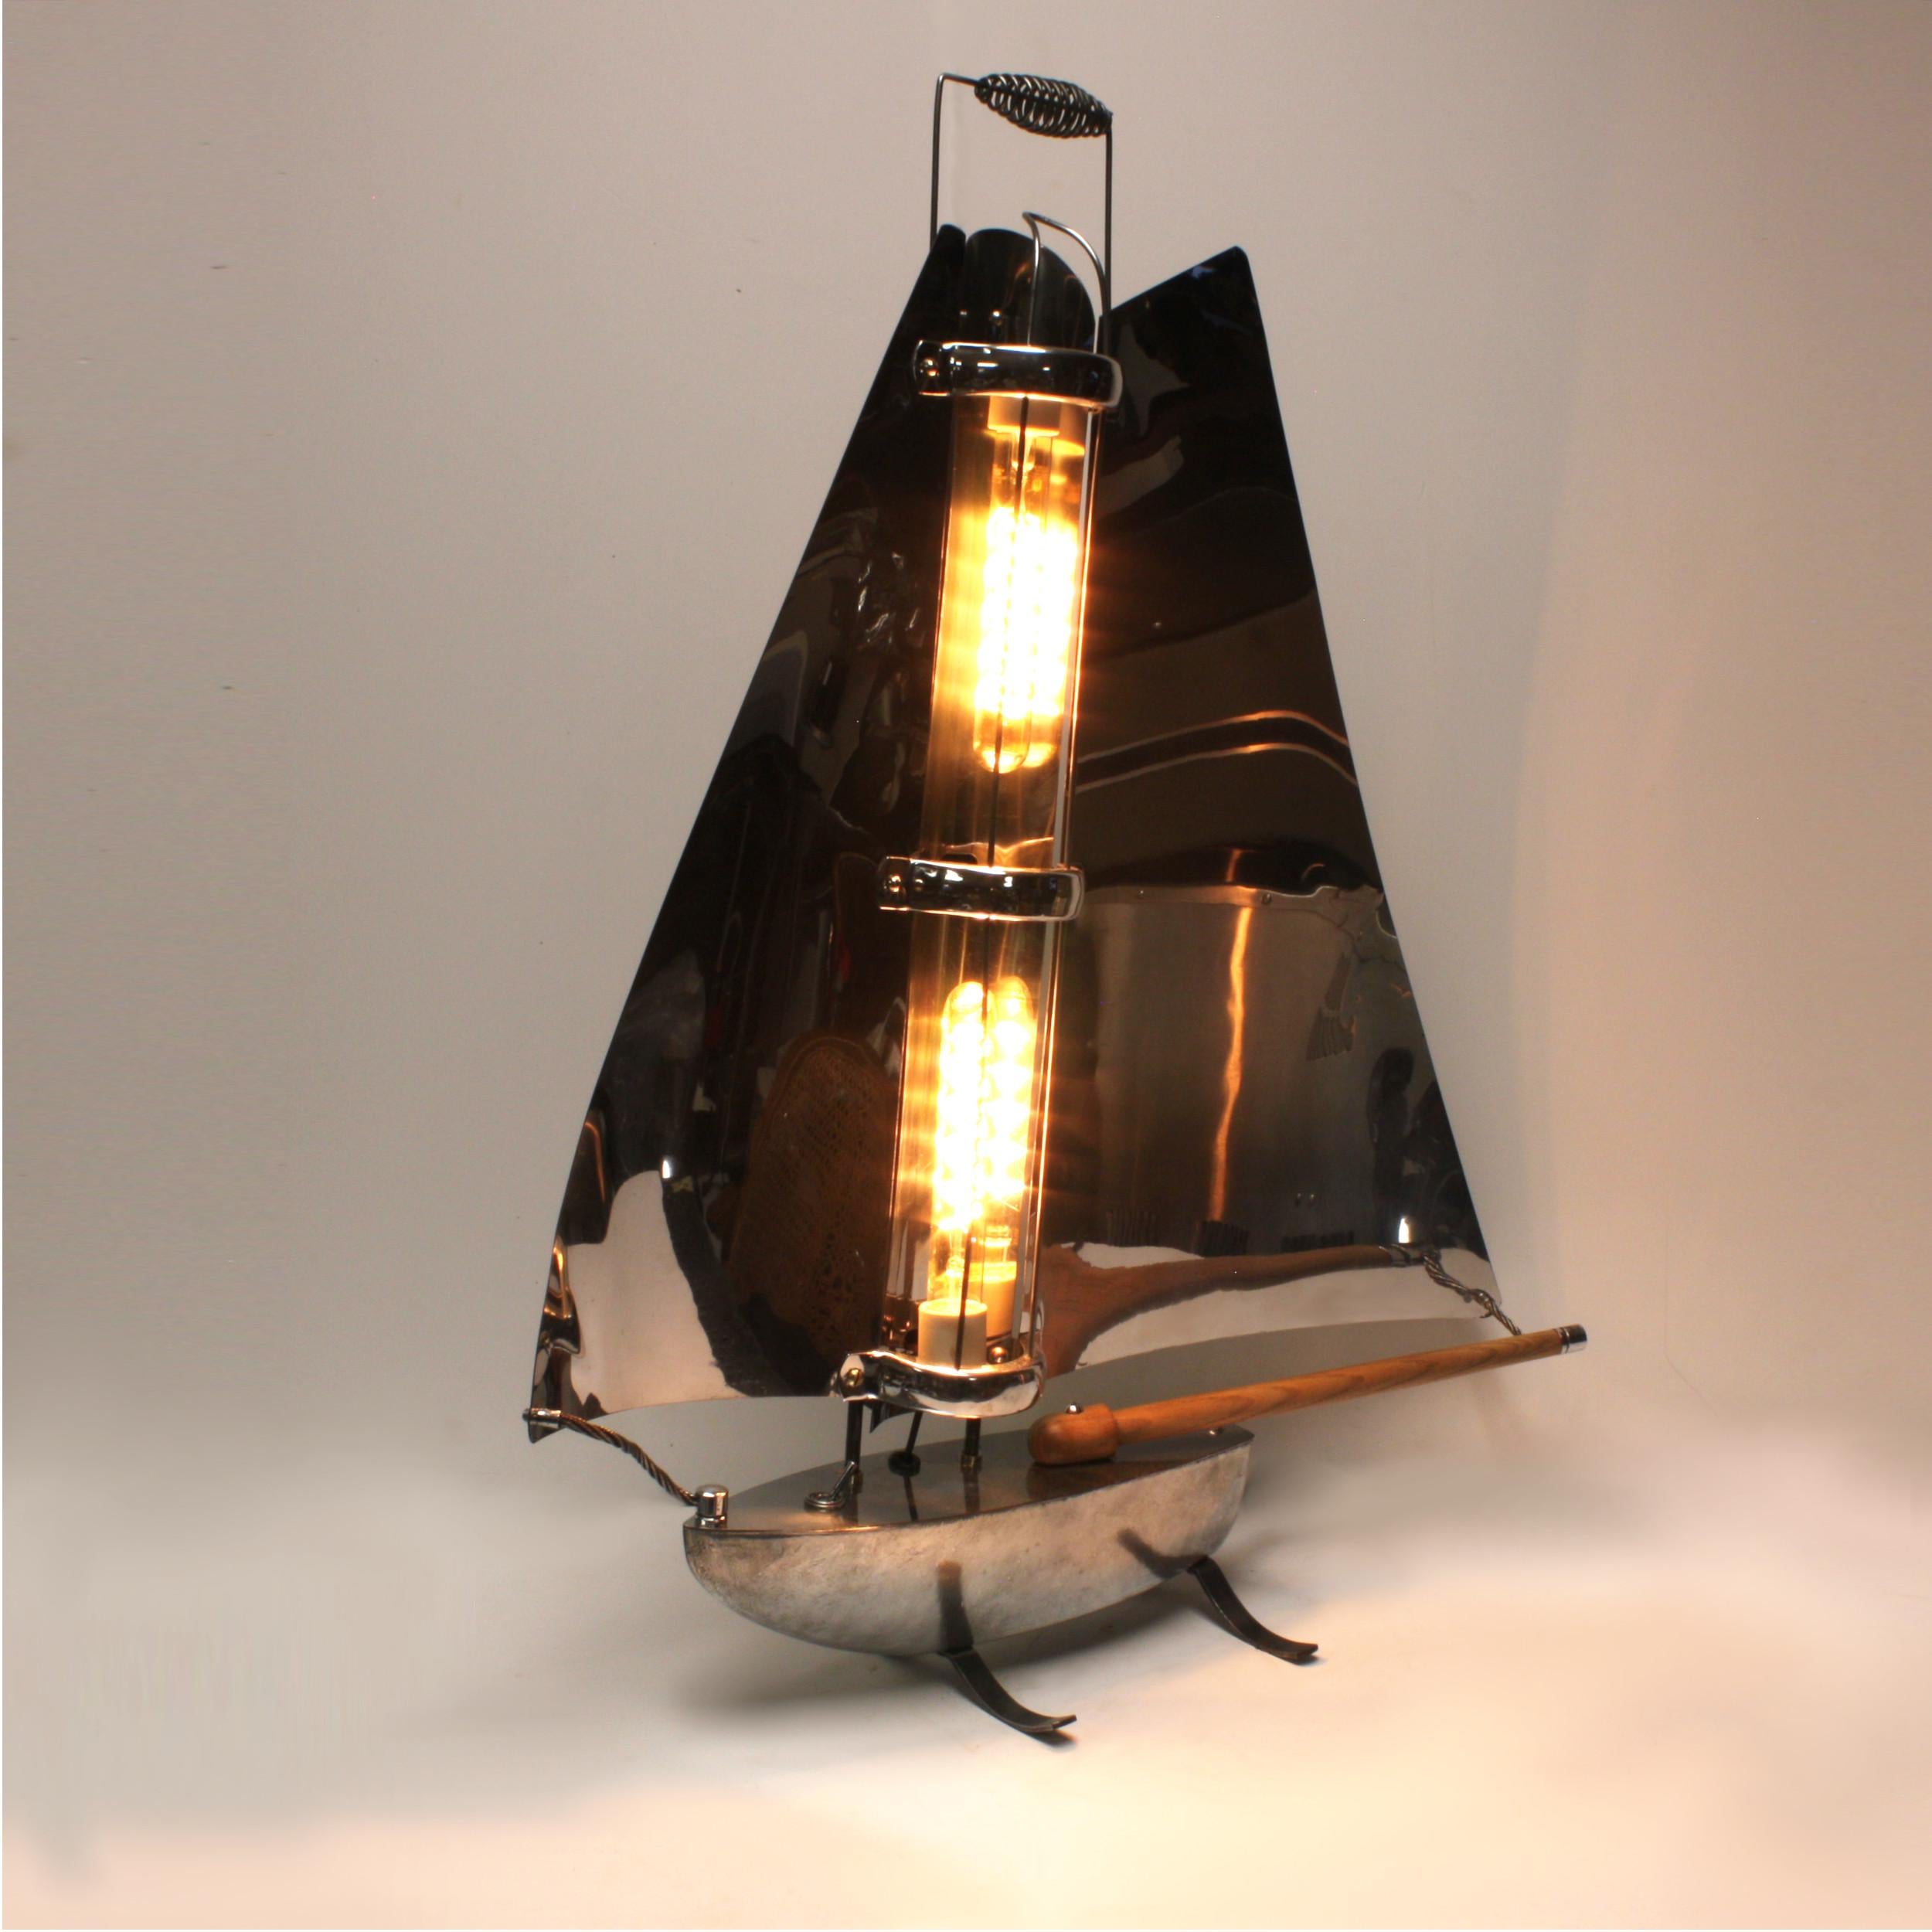 Art Deco Vintage 1930s Aluminum Industrial Machine Age Sailboat Lamp by Bunting Electric For Sale